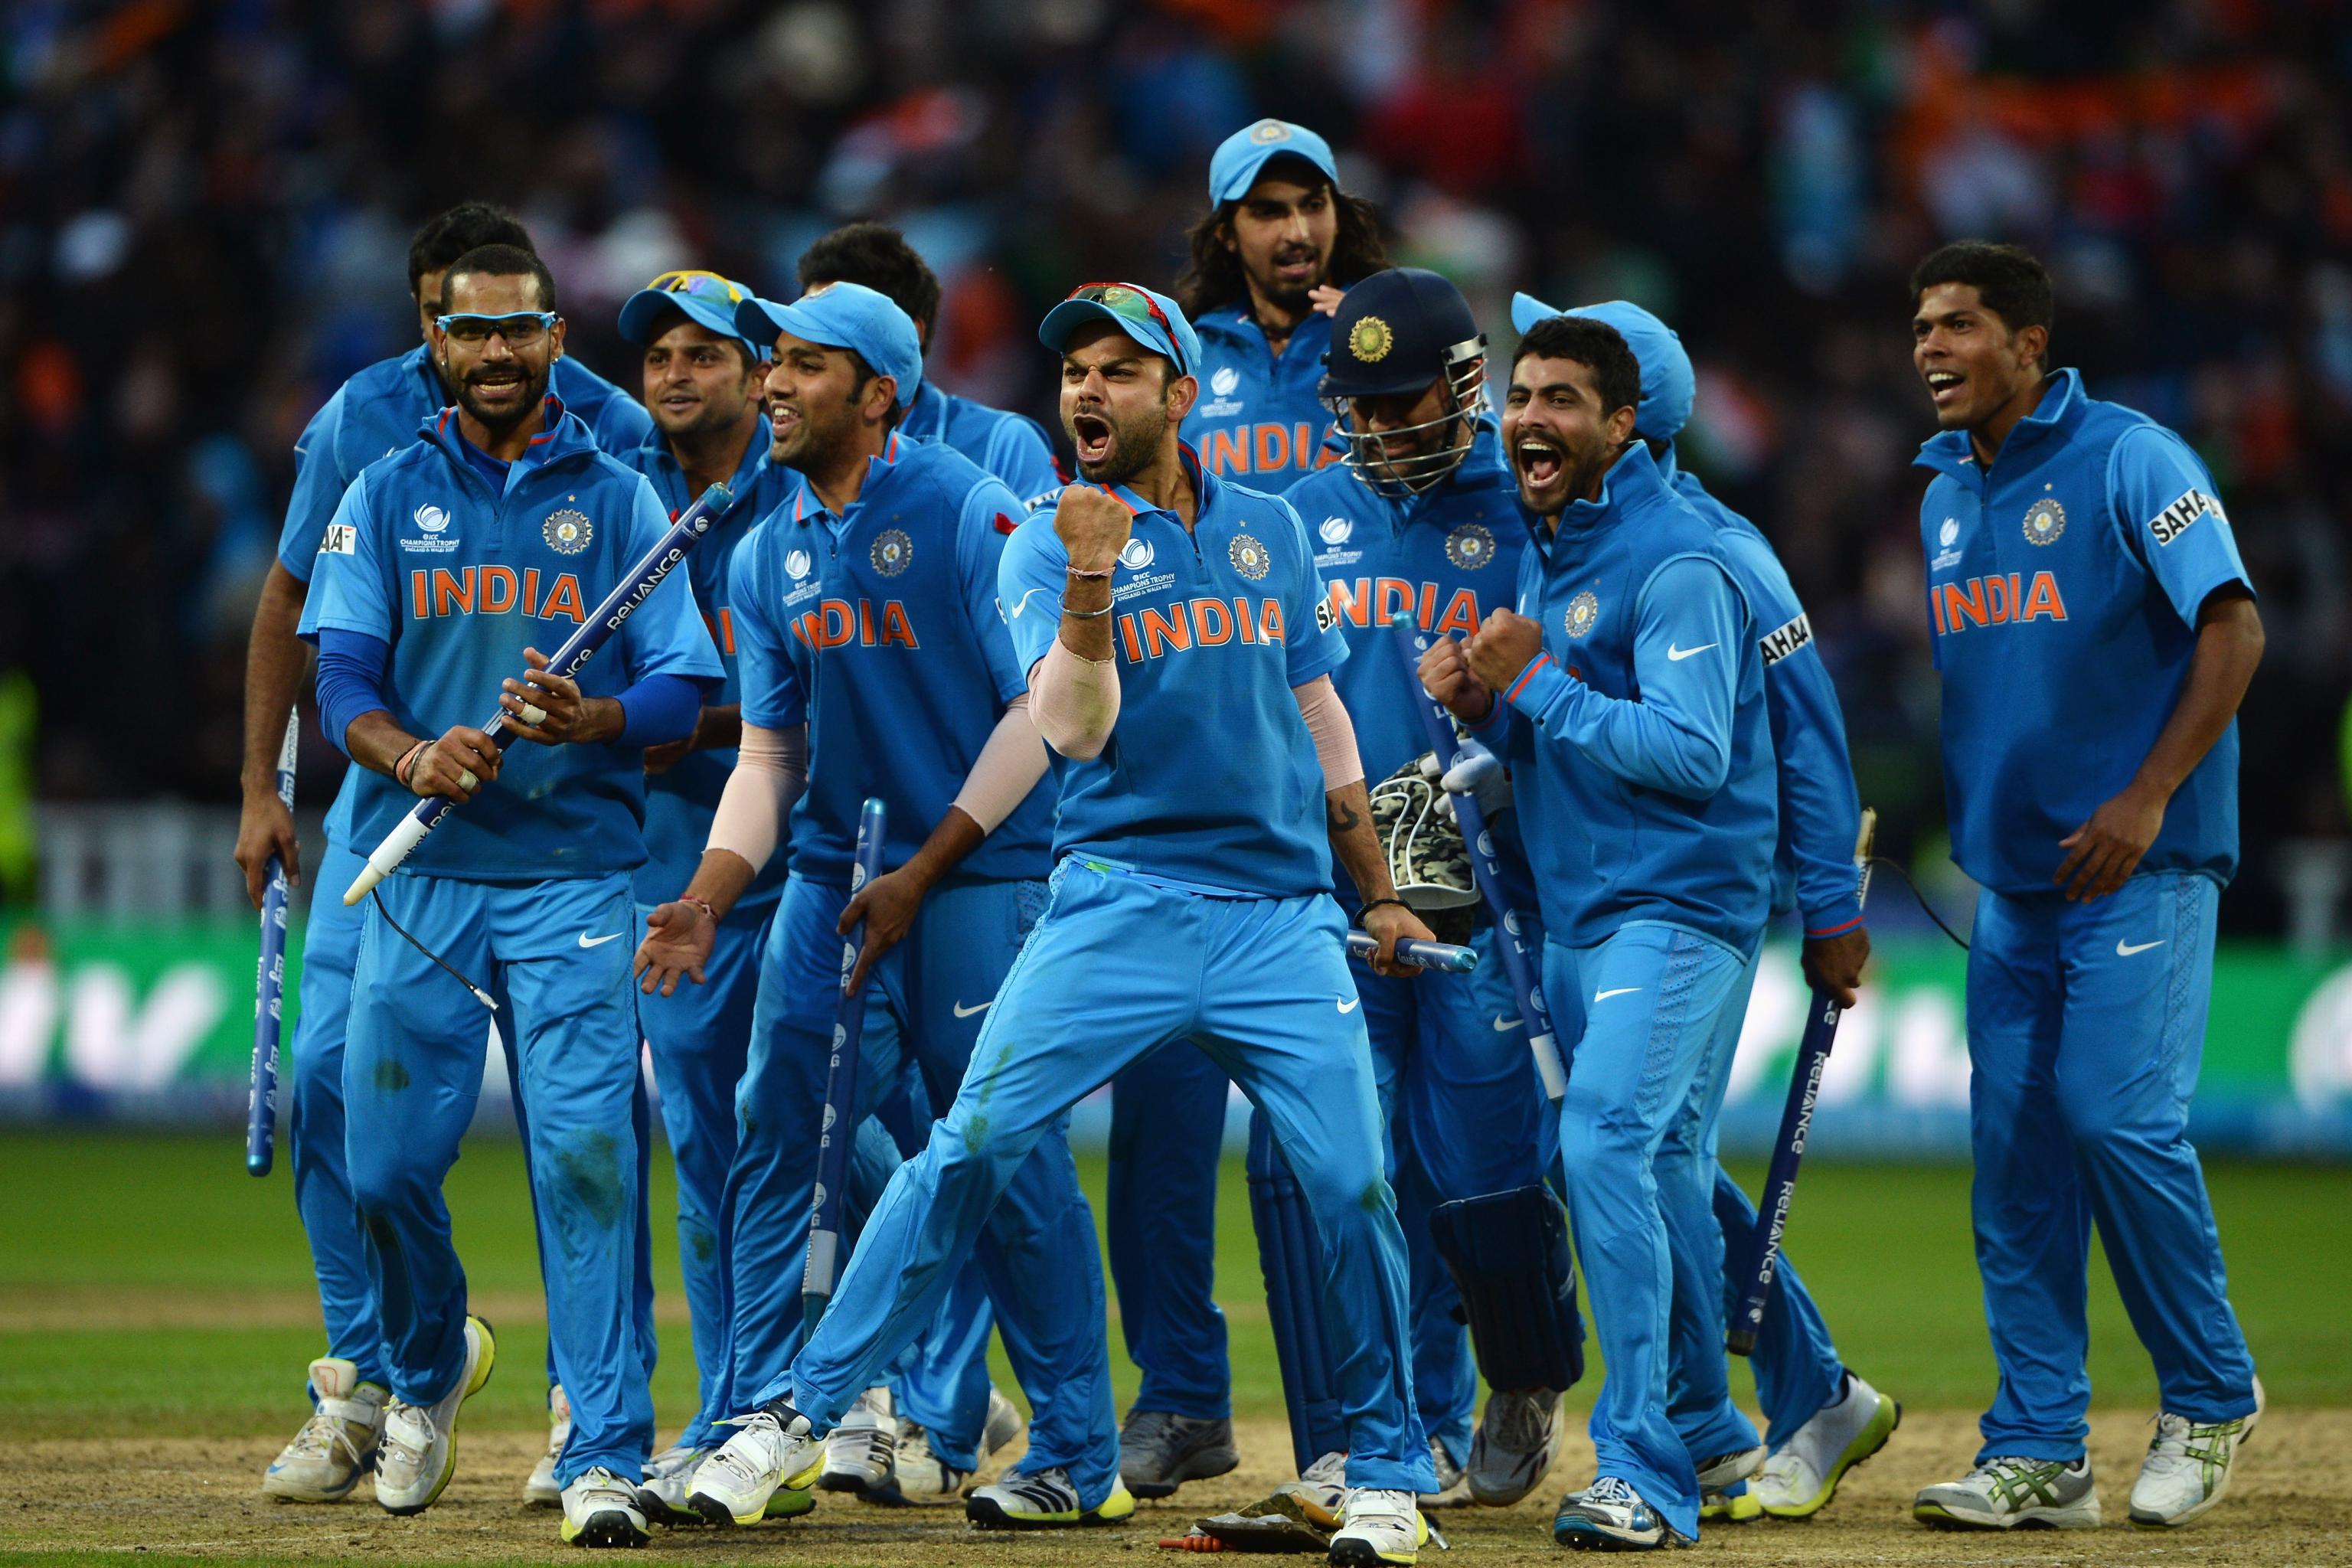 ICC Champions Trophy Final 2013: England vs. India Score, Recap and More |  Bleacher Report | Latest News, Videos and Highlights